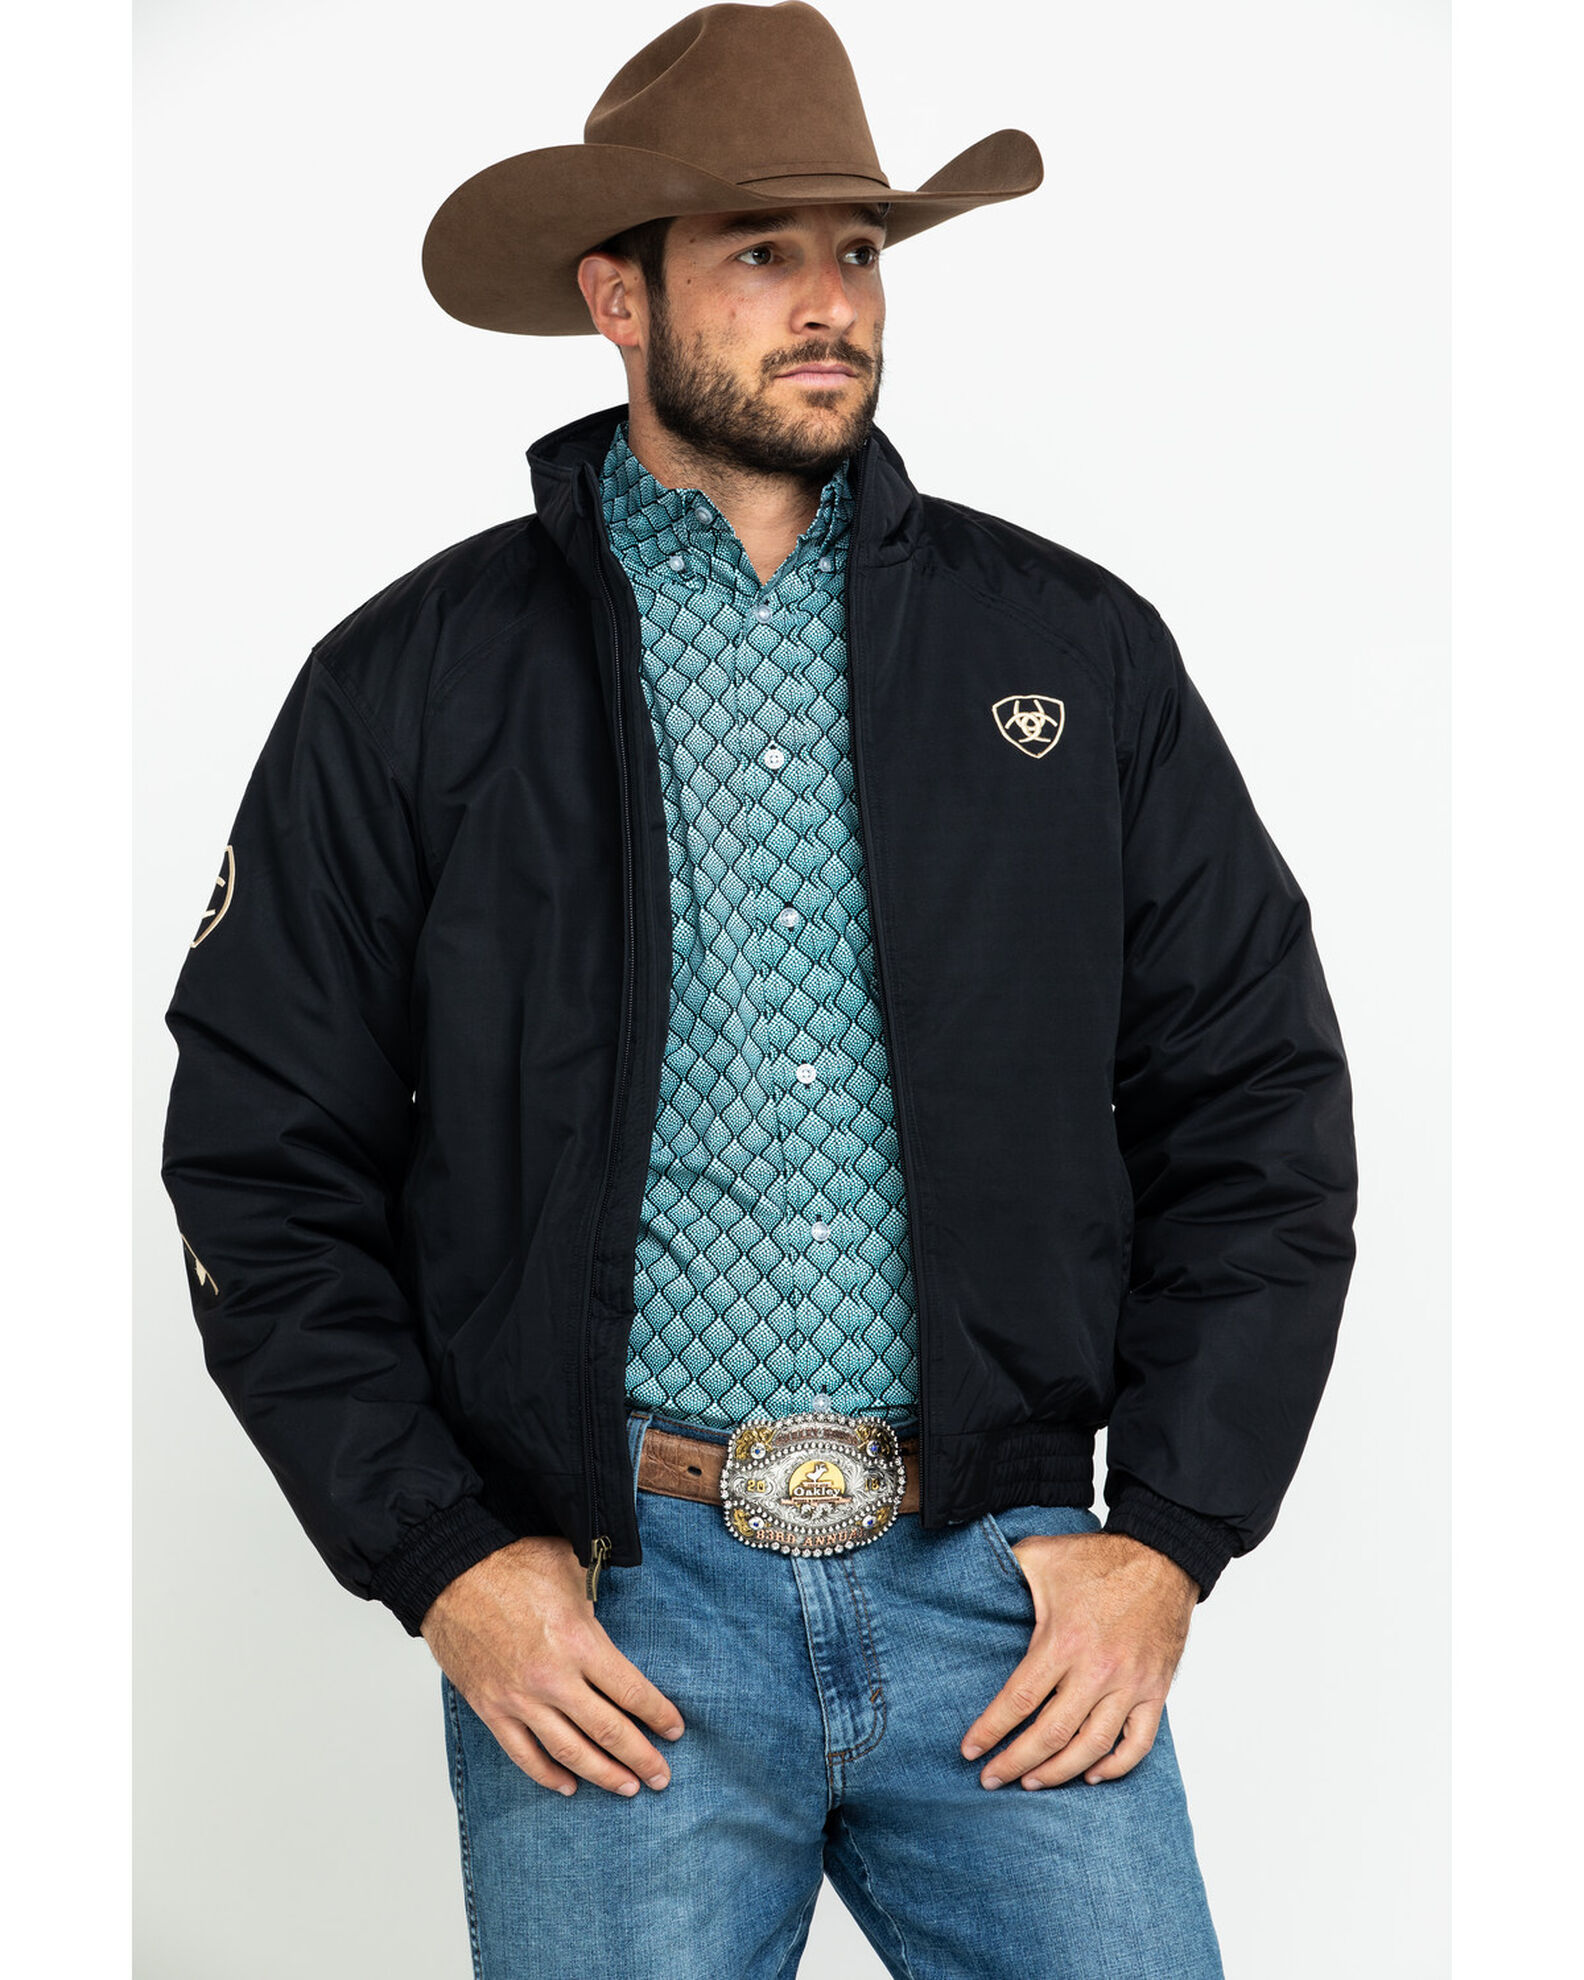 Ariat men's jacket is a well-known brand that specializes in producing high-quality apparel and footwear for equestrian sports